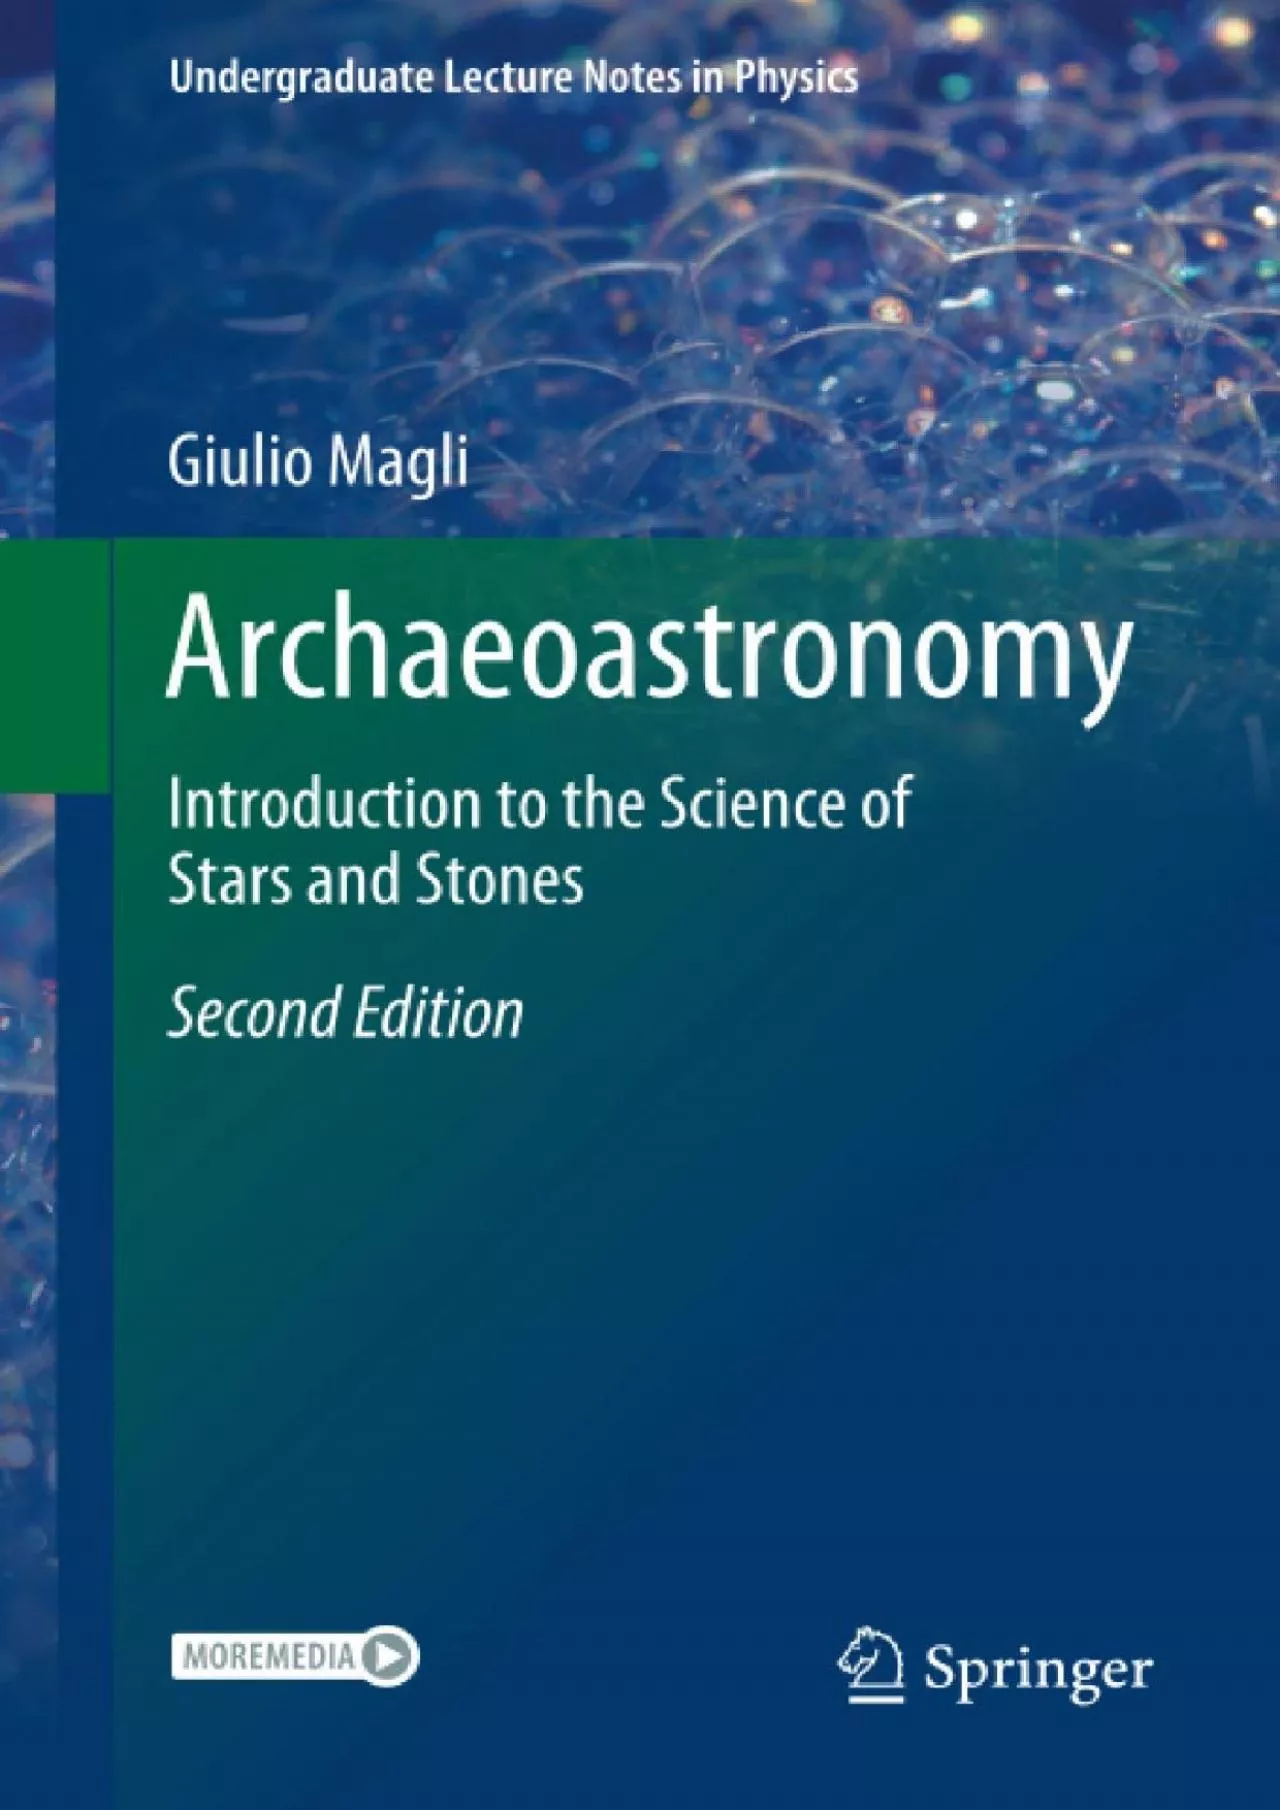 (BOOS)-Archaeoastronomy: Introduction to the Science of Stars and Stones (Undergraduate